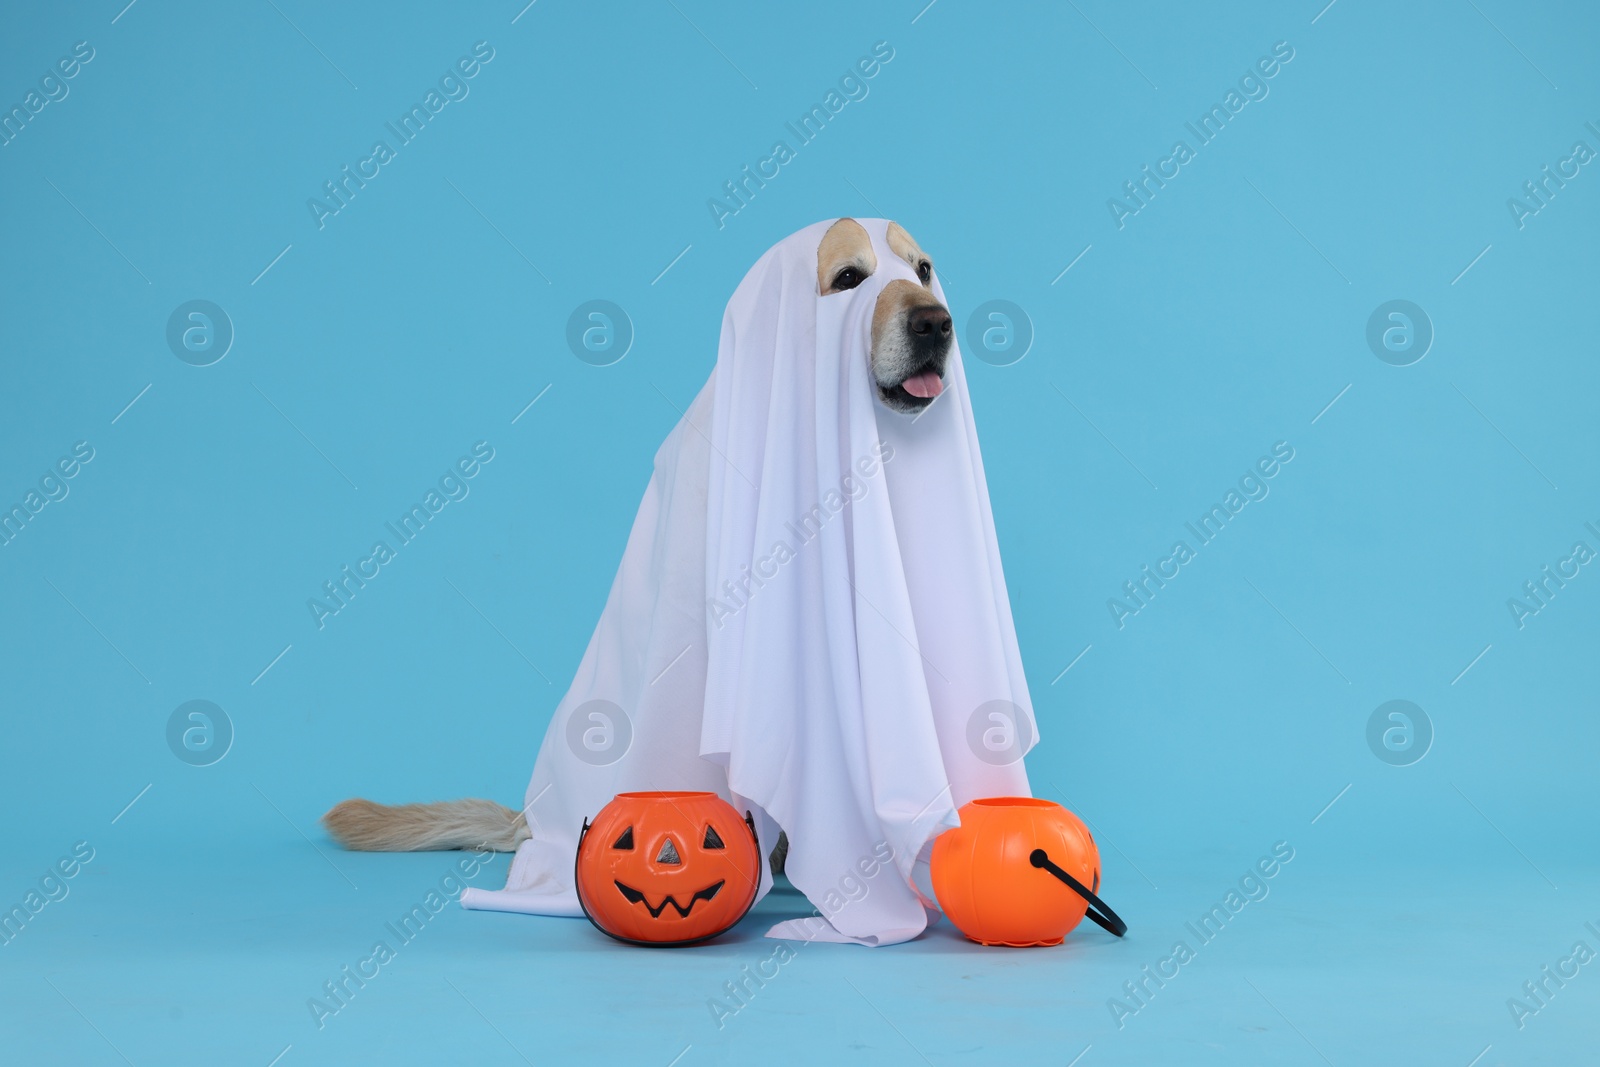 Photo of Cute Labrador Retriever dog wearing ghost costume with Halloween buckets on light blue background